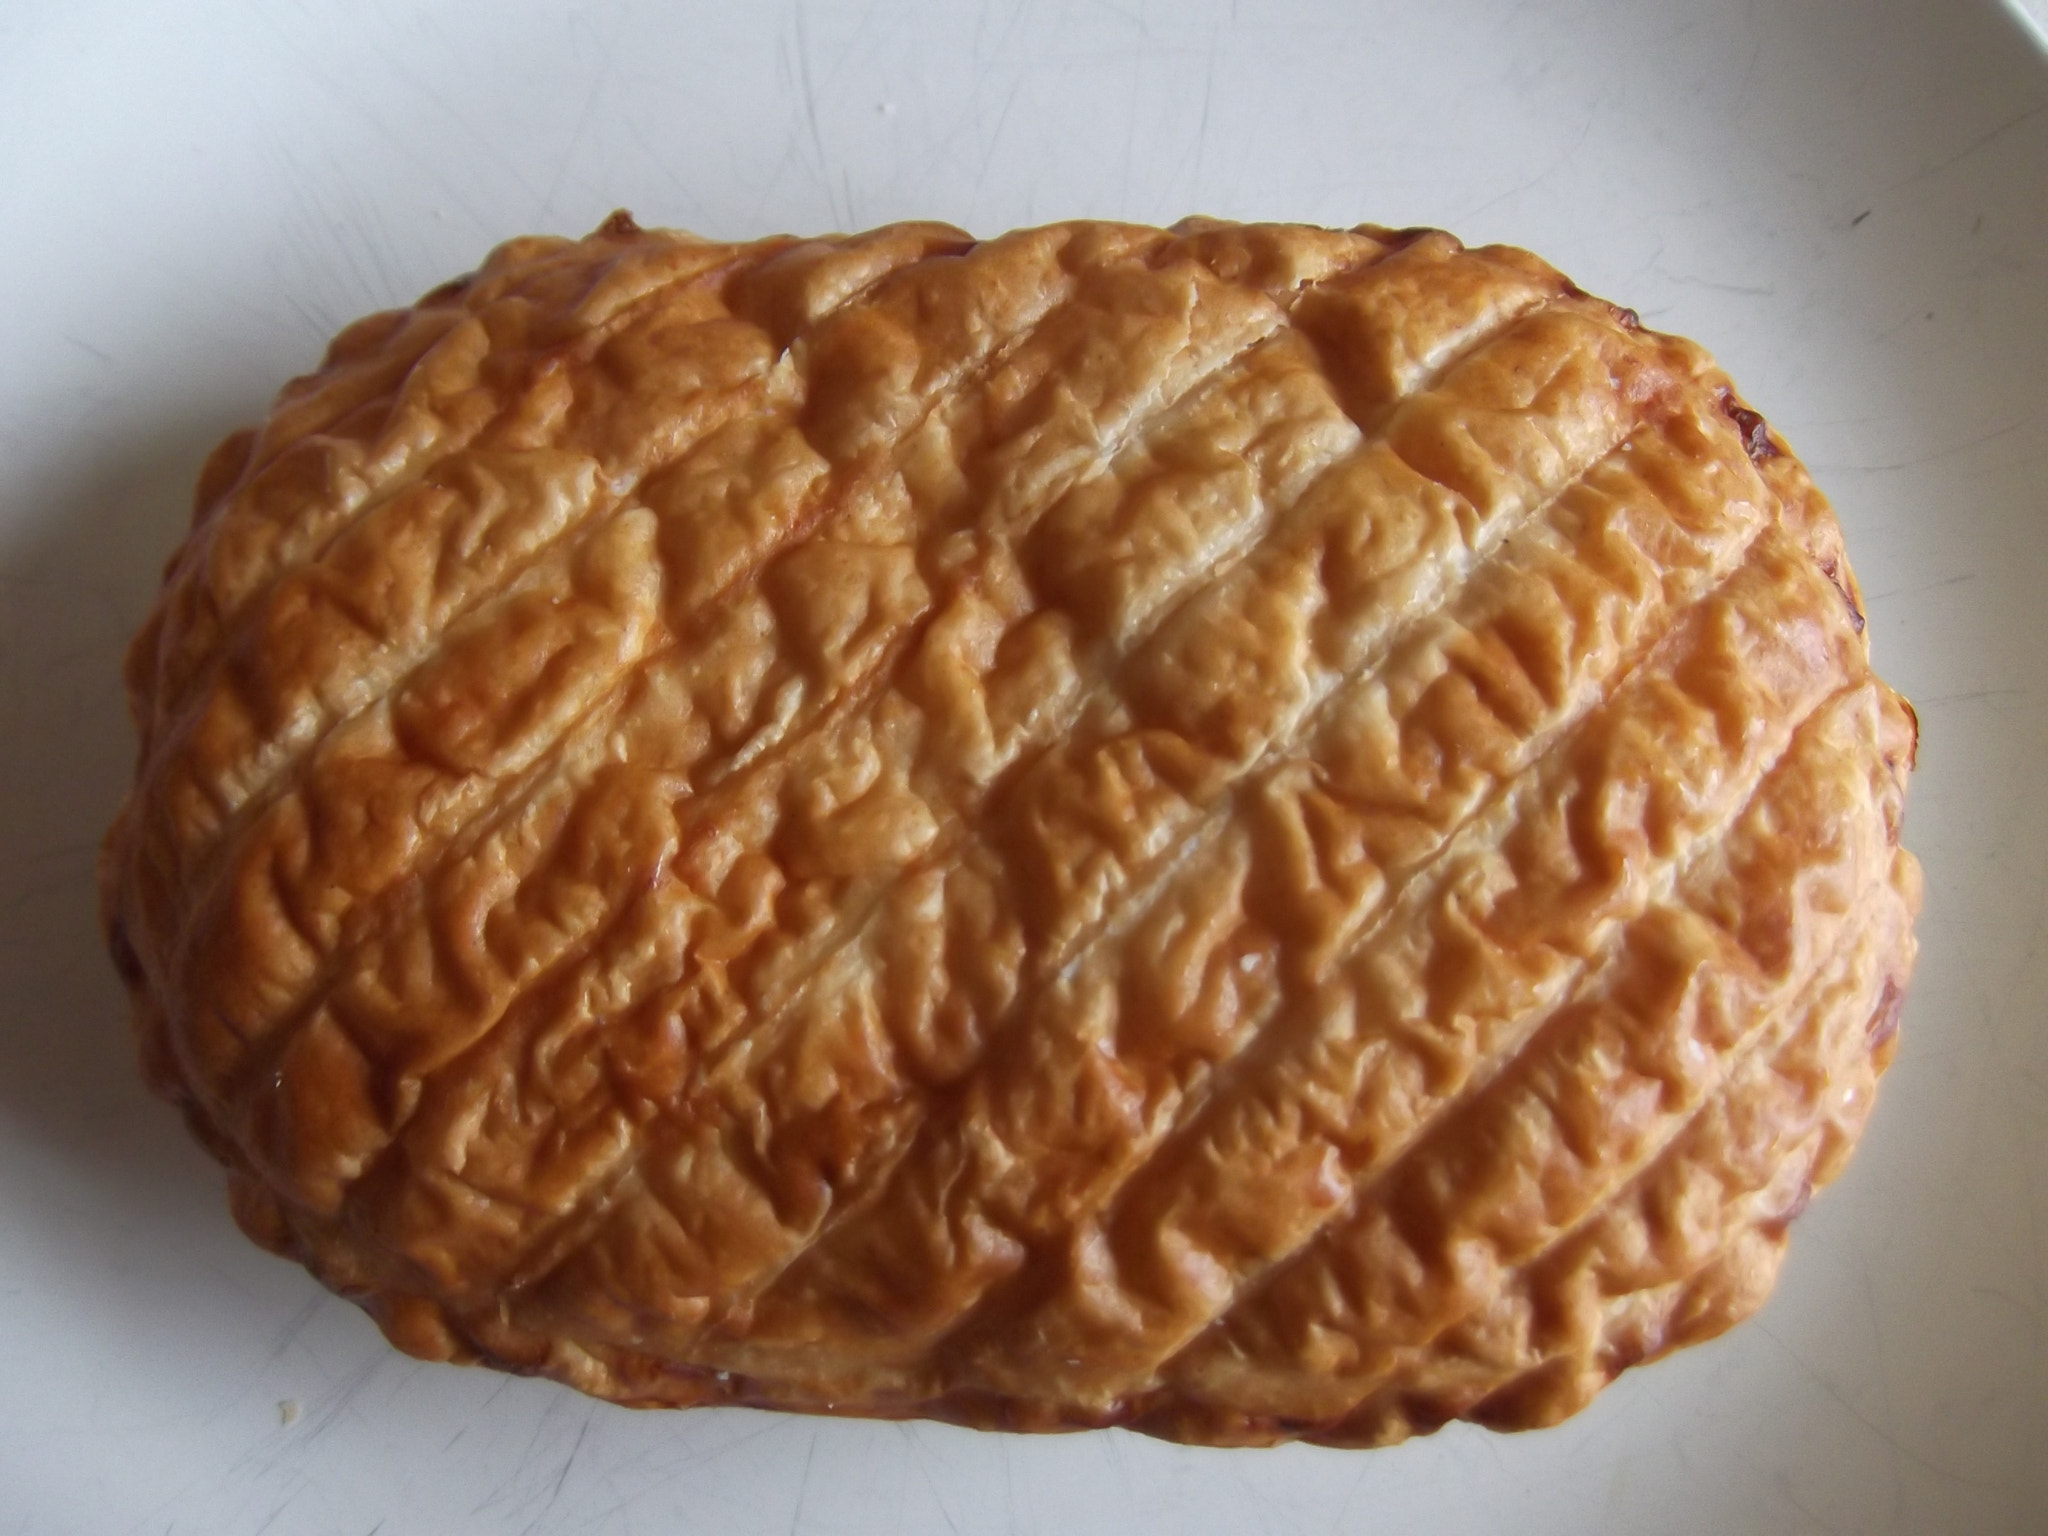 Fujifilm FinePix T350 sample photo. Meat pasty+ photography